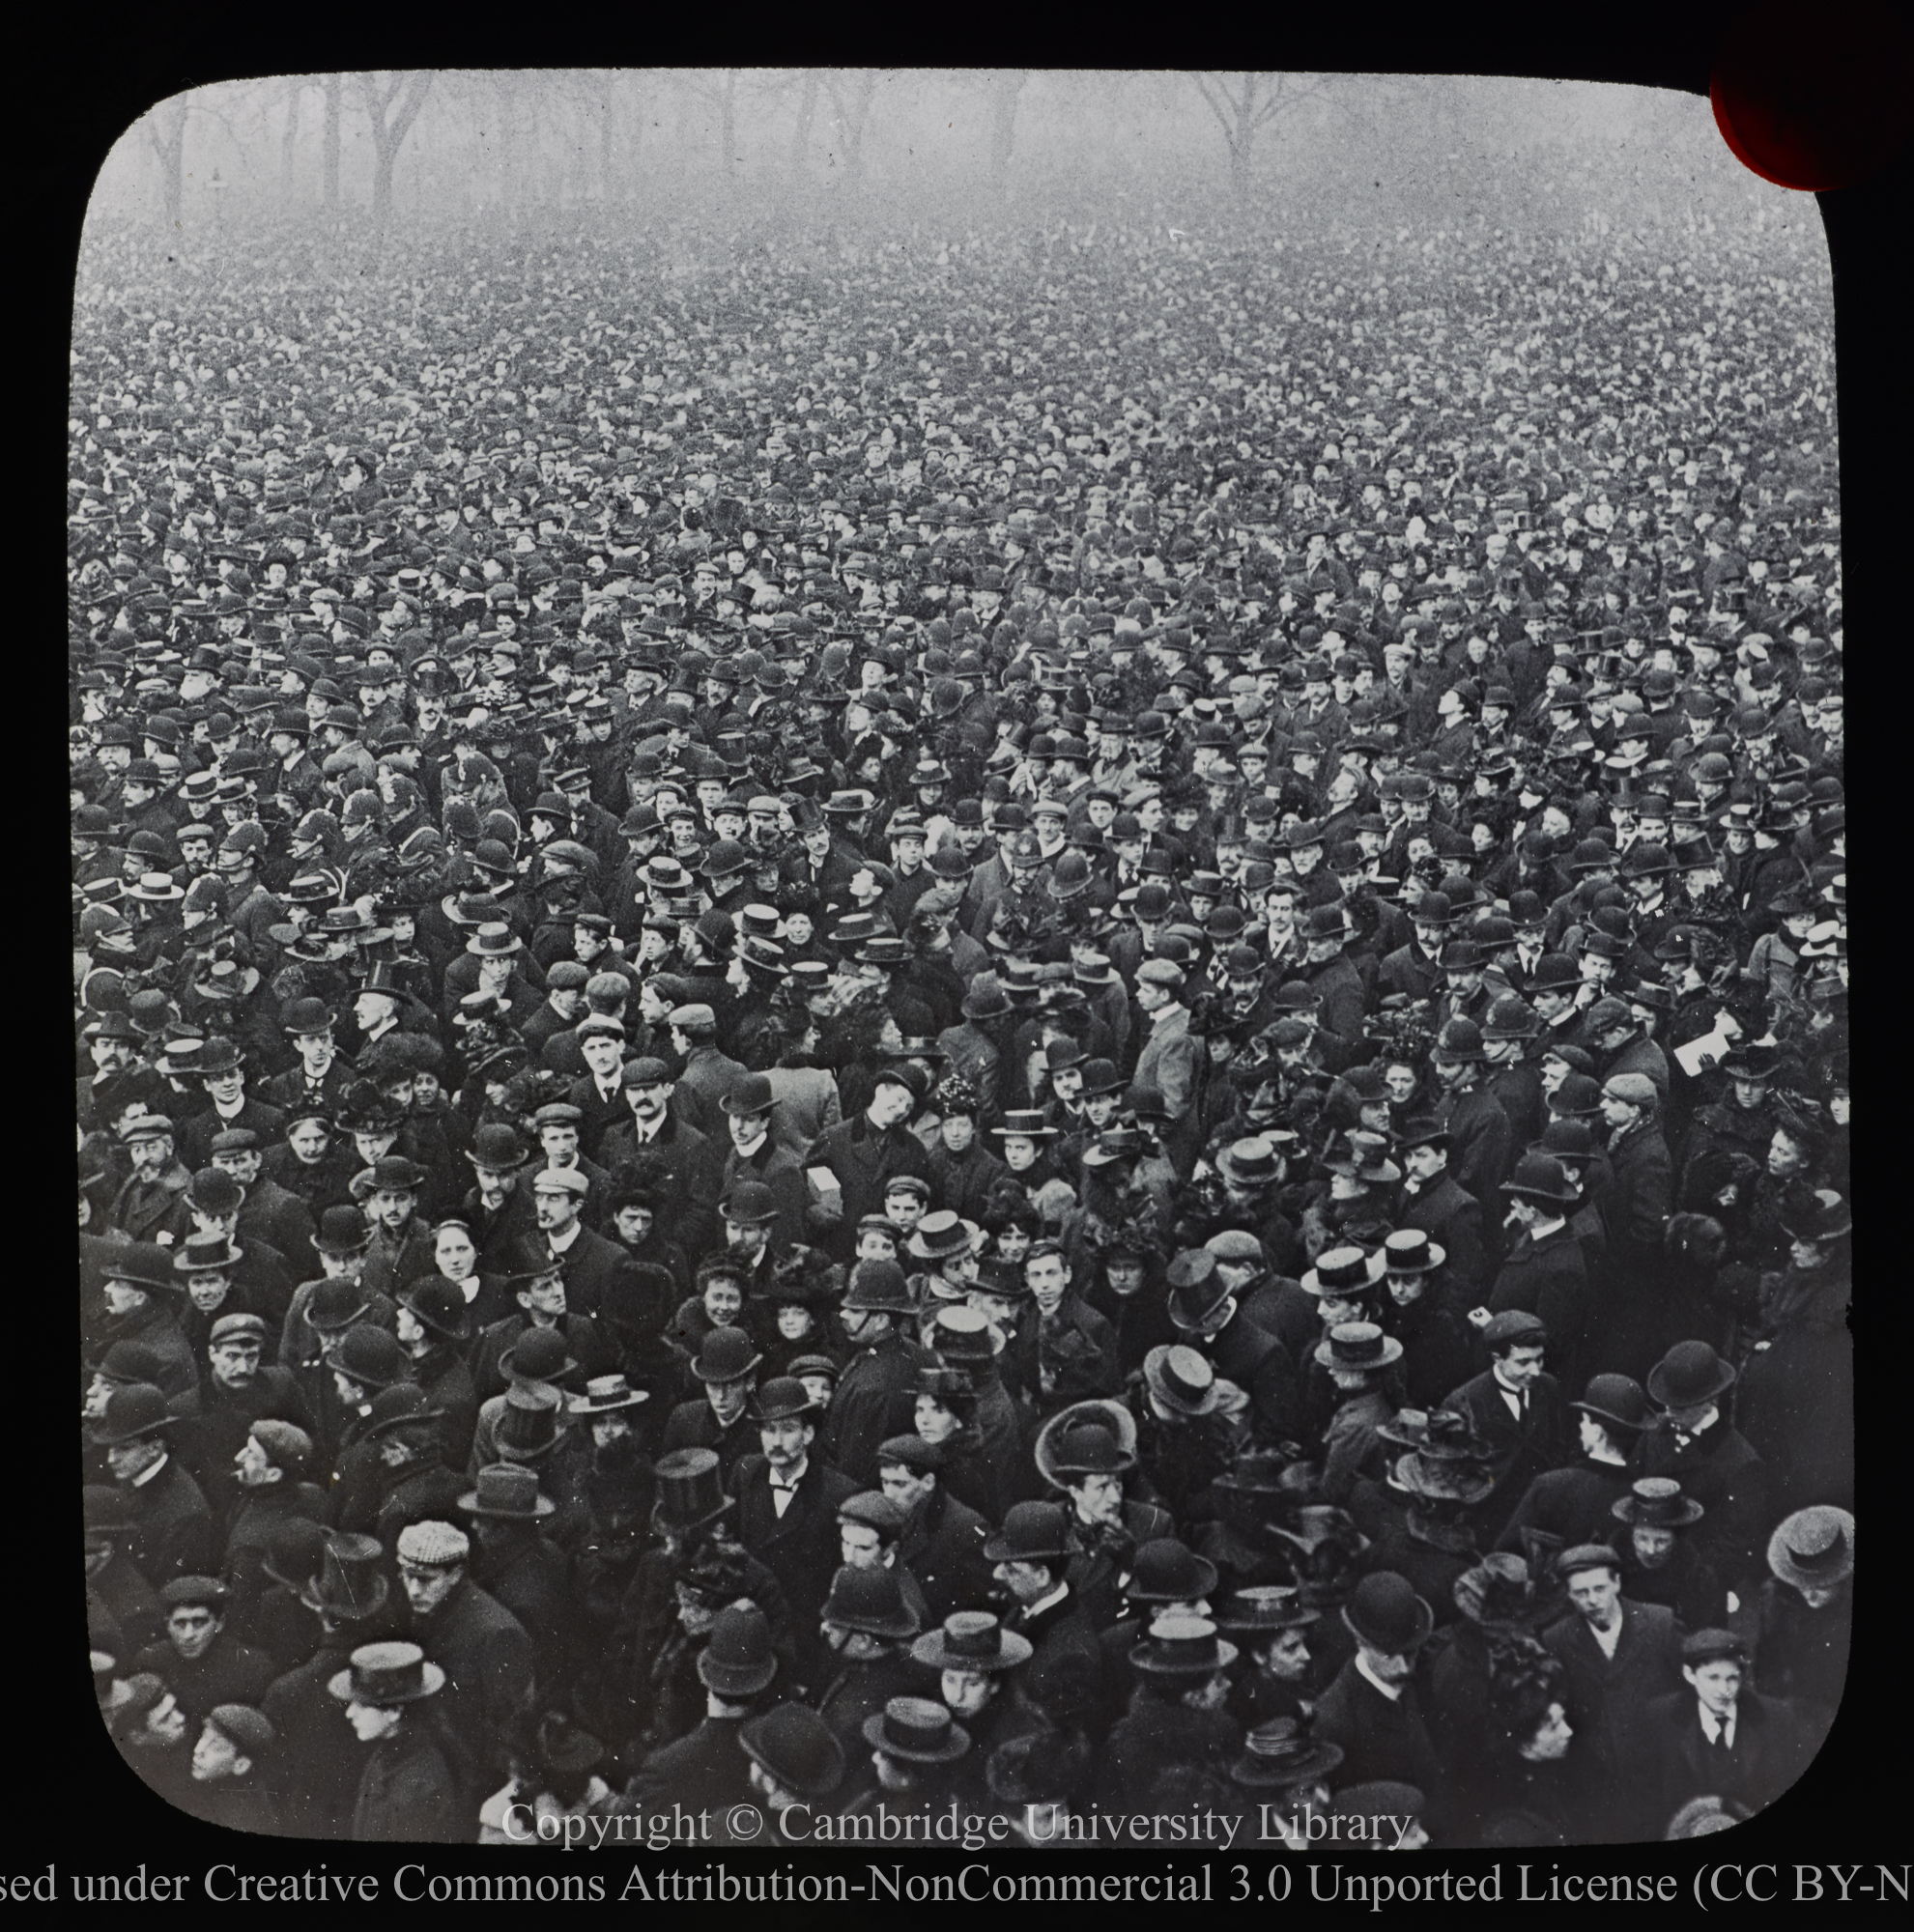 The crowd&#39;, apparently in London, perhaps Hyde Park, 1892 - 1914